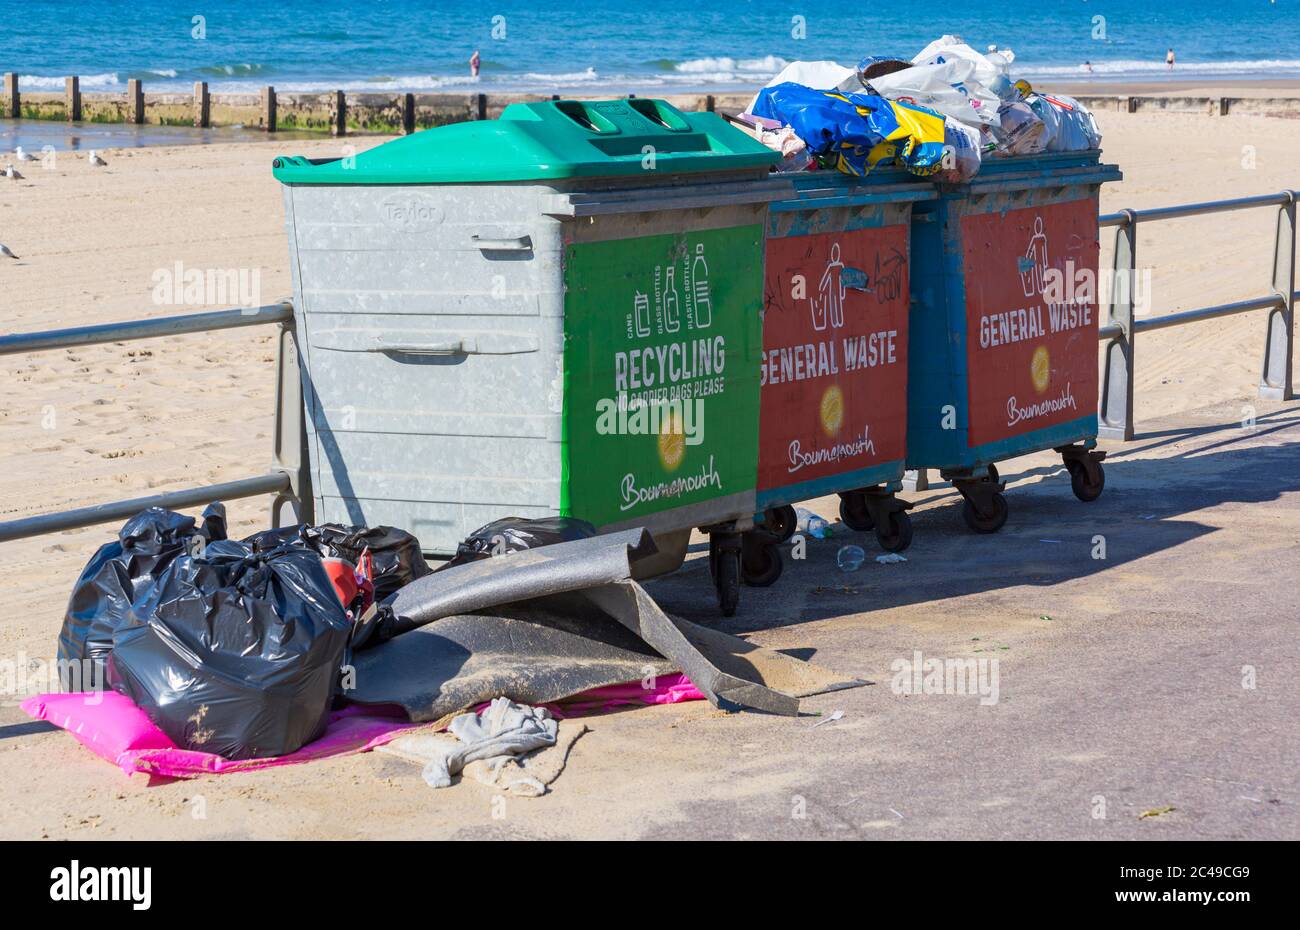 Bournemouth, Dorset UK. 25th June 2020. UK weather: morning after the day before shows the aftermath of packed busy beaches at Bournemouth as a result of the heatwave with litter everywhere and tents on the beaches. The BCP council try to keep on top of it and council workers are out picking up litter from the beaches, but with another hot day it will probably be more of the same with crowds flocking to the beaches despite a plea from the council for visitors to stay away as social distancing is a problem with beaches so busy. Credit: Carolyn Jenkins/Alamy Live News Stock Photo